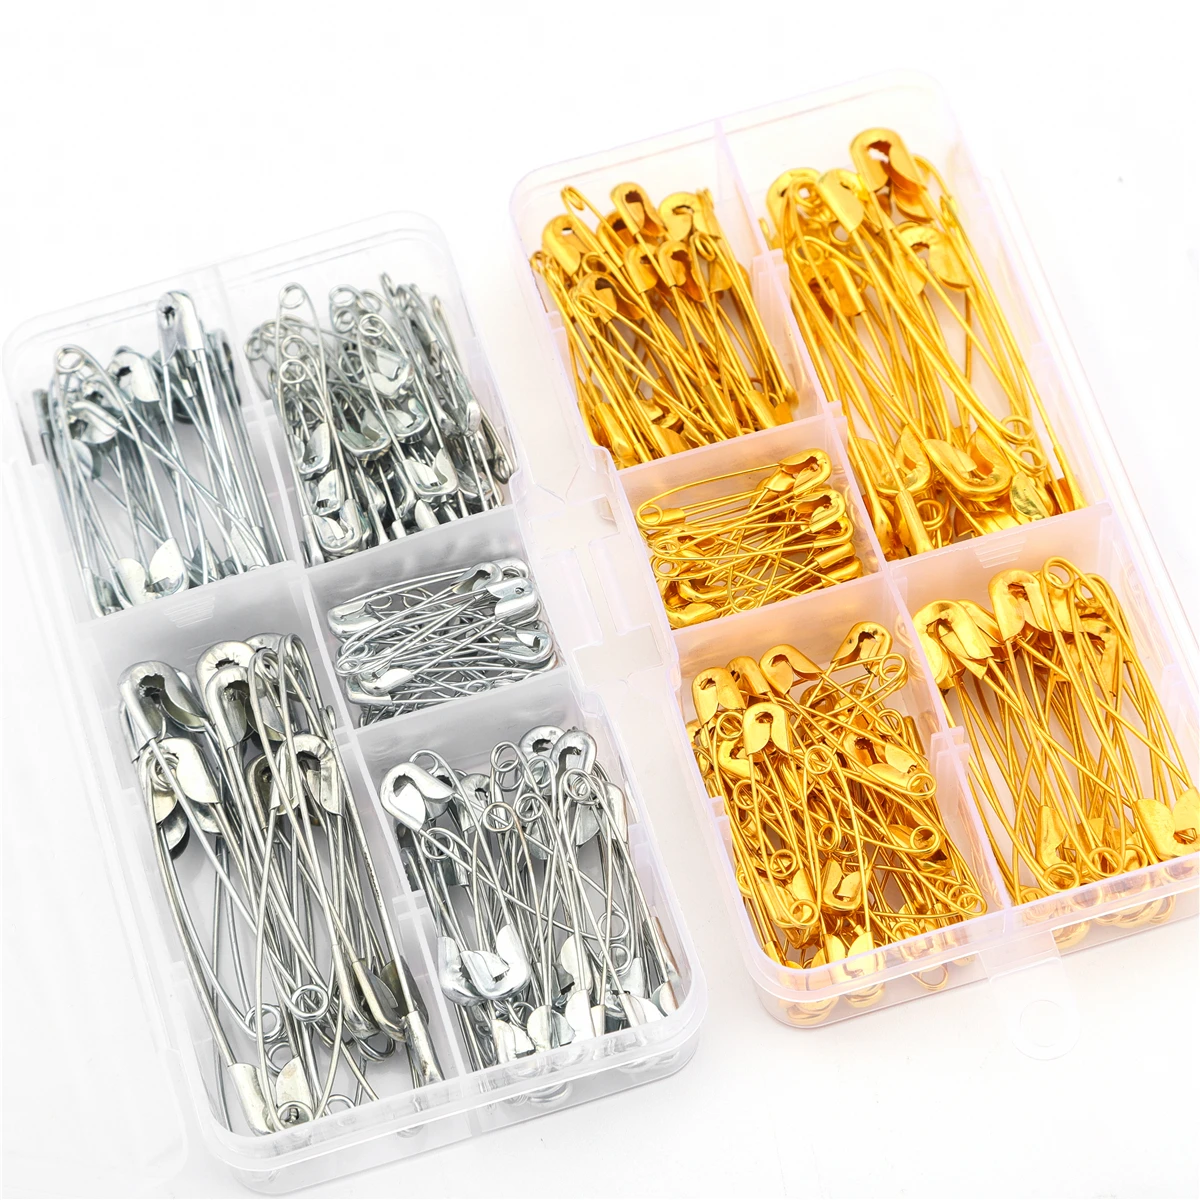 1000pcs Mini Safety Pins 18mm Black/Silver/Golden Safety Pins Metal Clip  Marker Needle Safety Pind Pins Pincushions Accessories